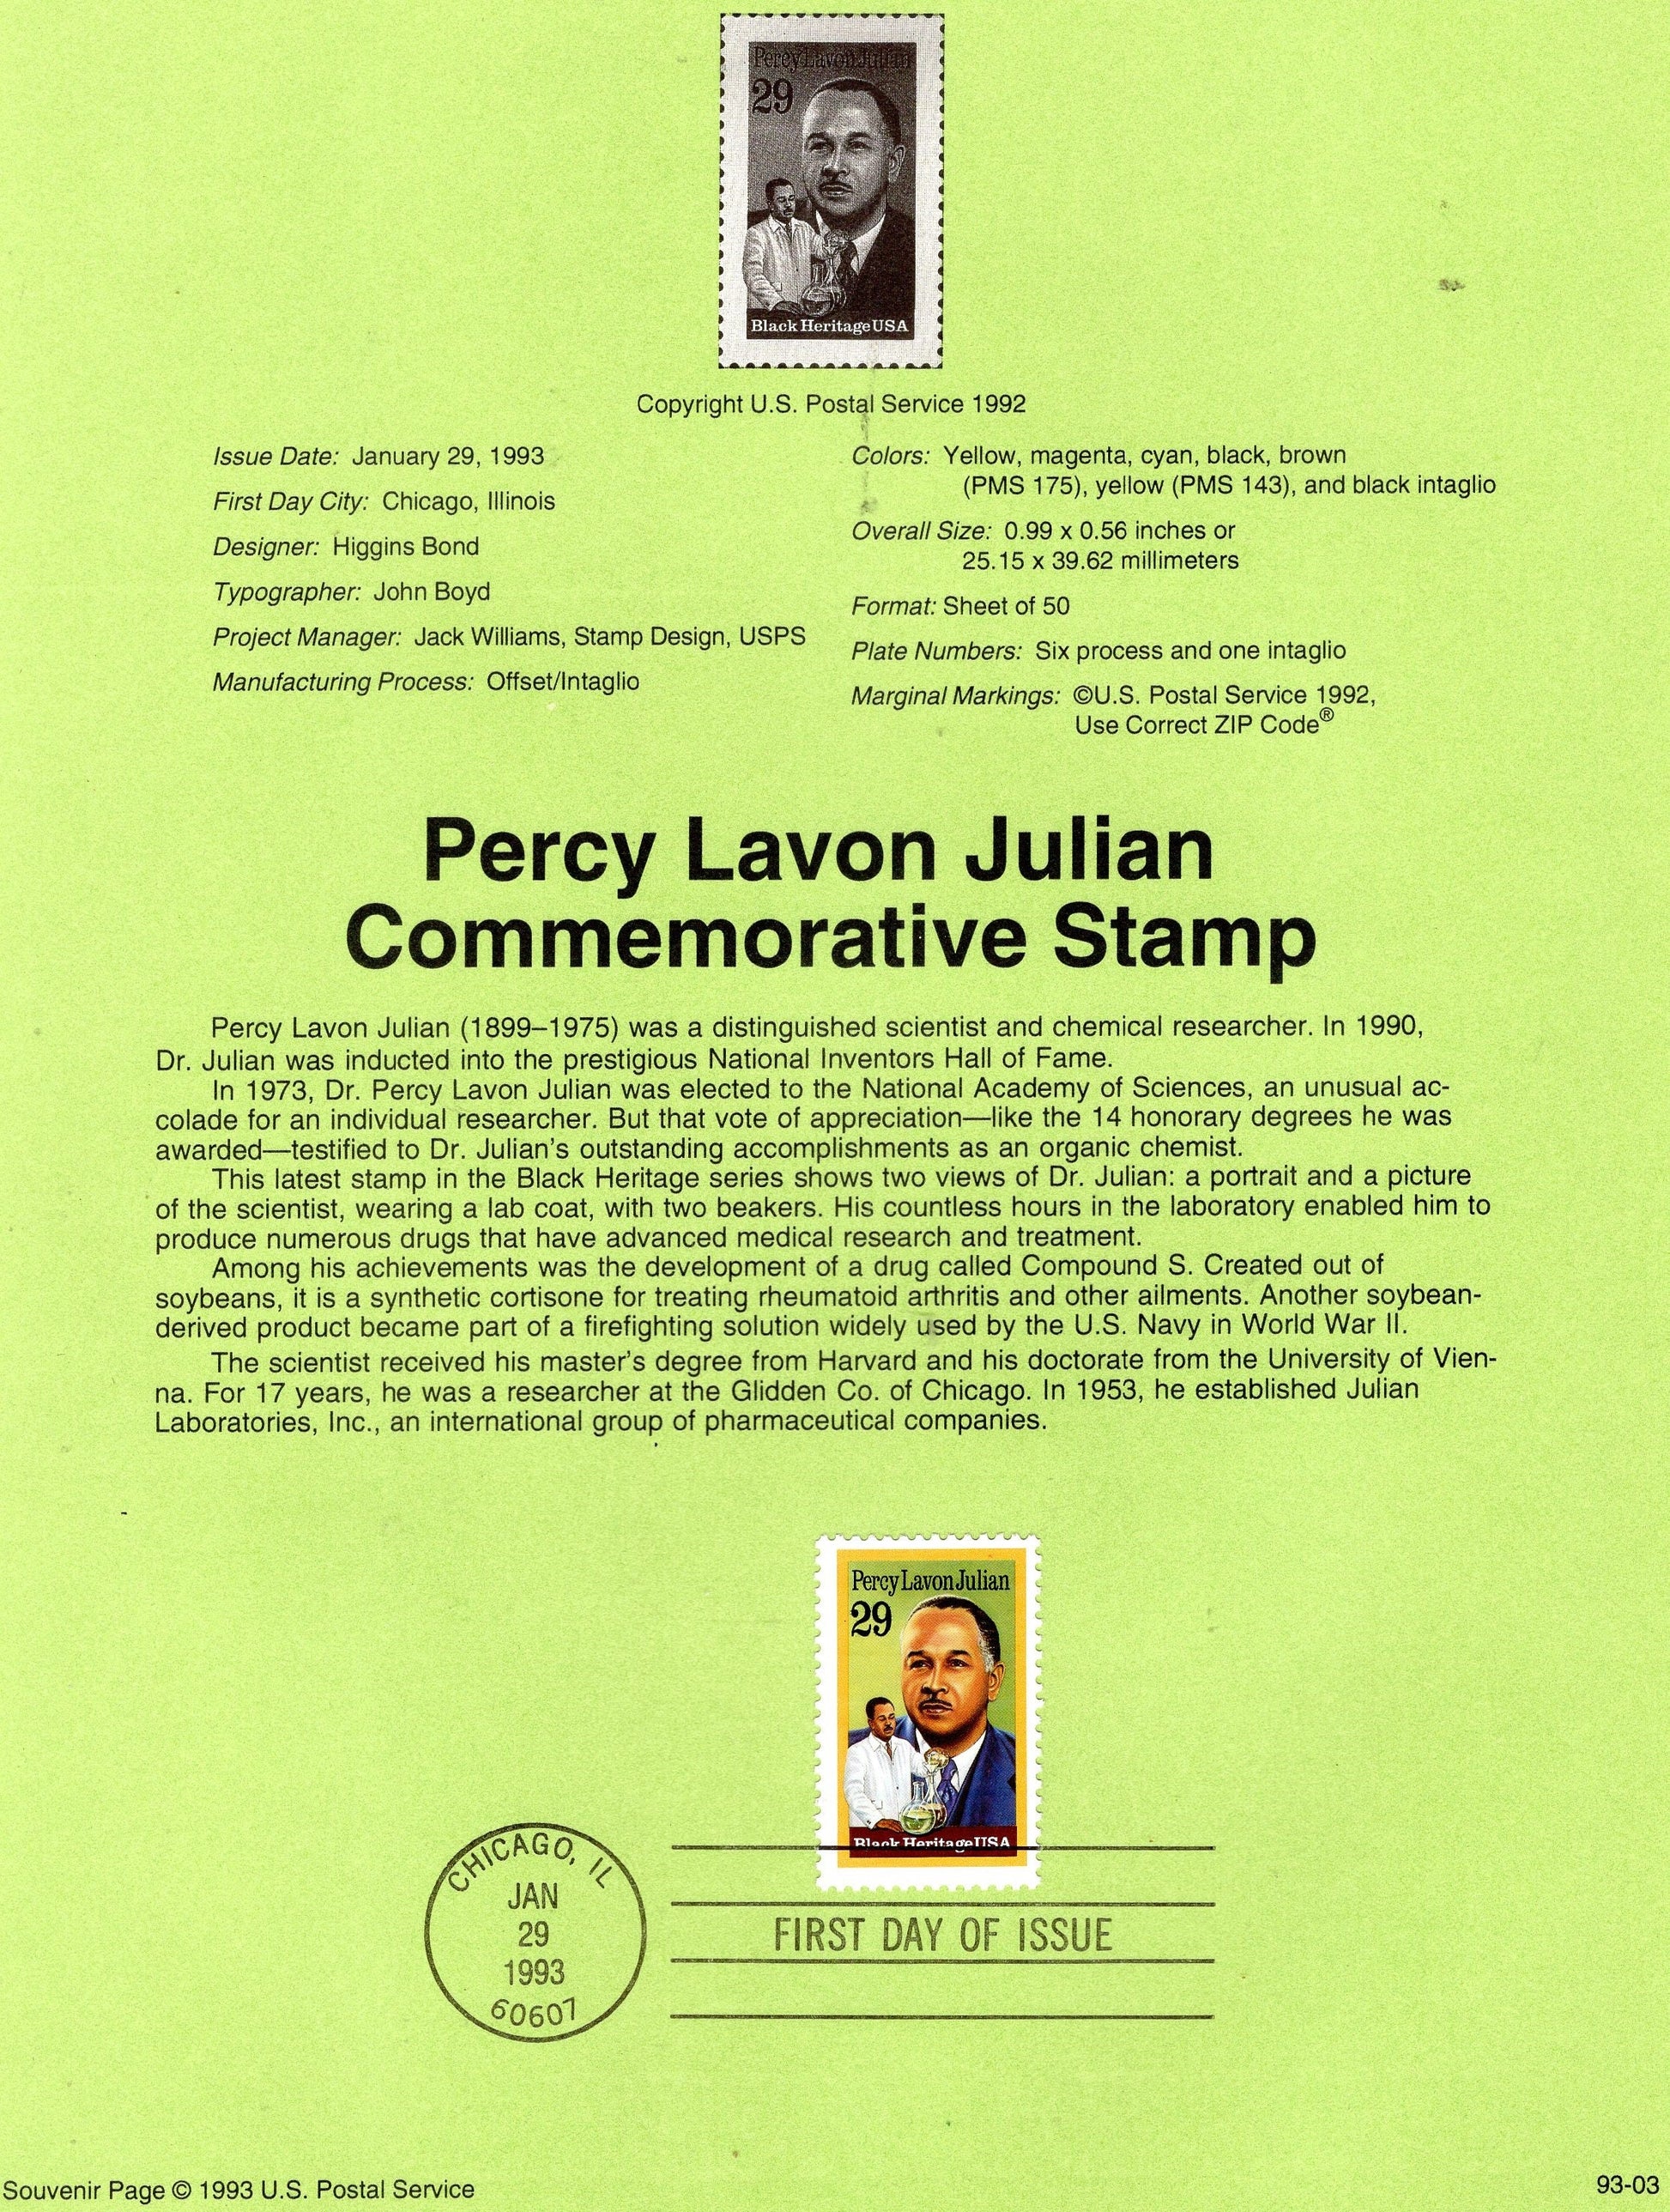 PERCY JULIAN Chemist Black Heritage Official USPS Souvenir Page Stamp with First Day Cancel Text - Issued in 1993 - s2746 -